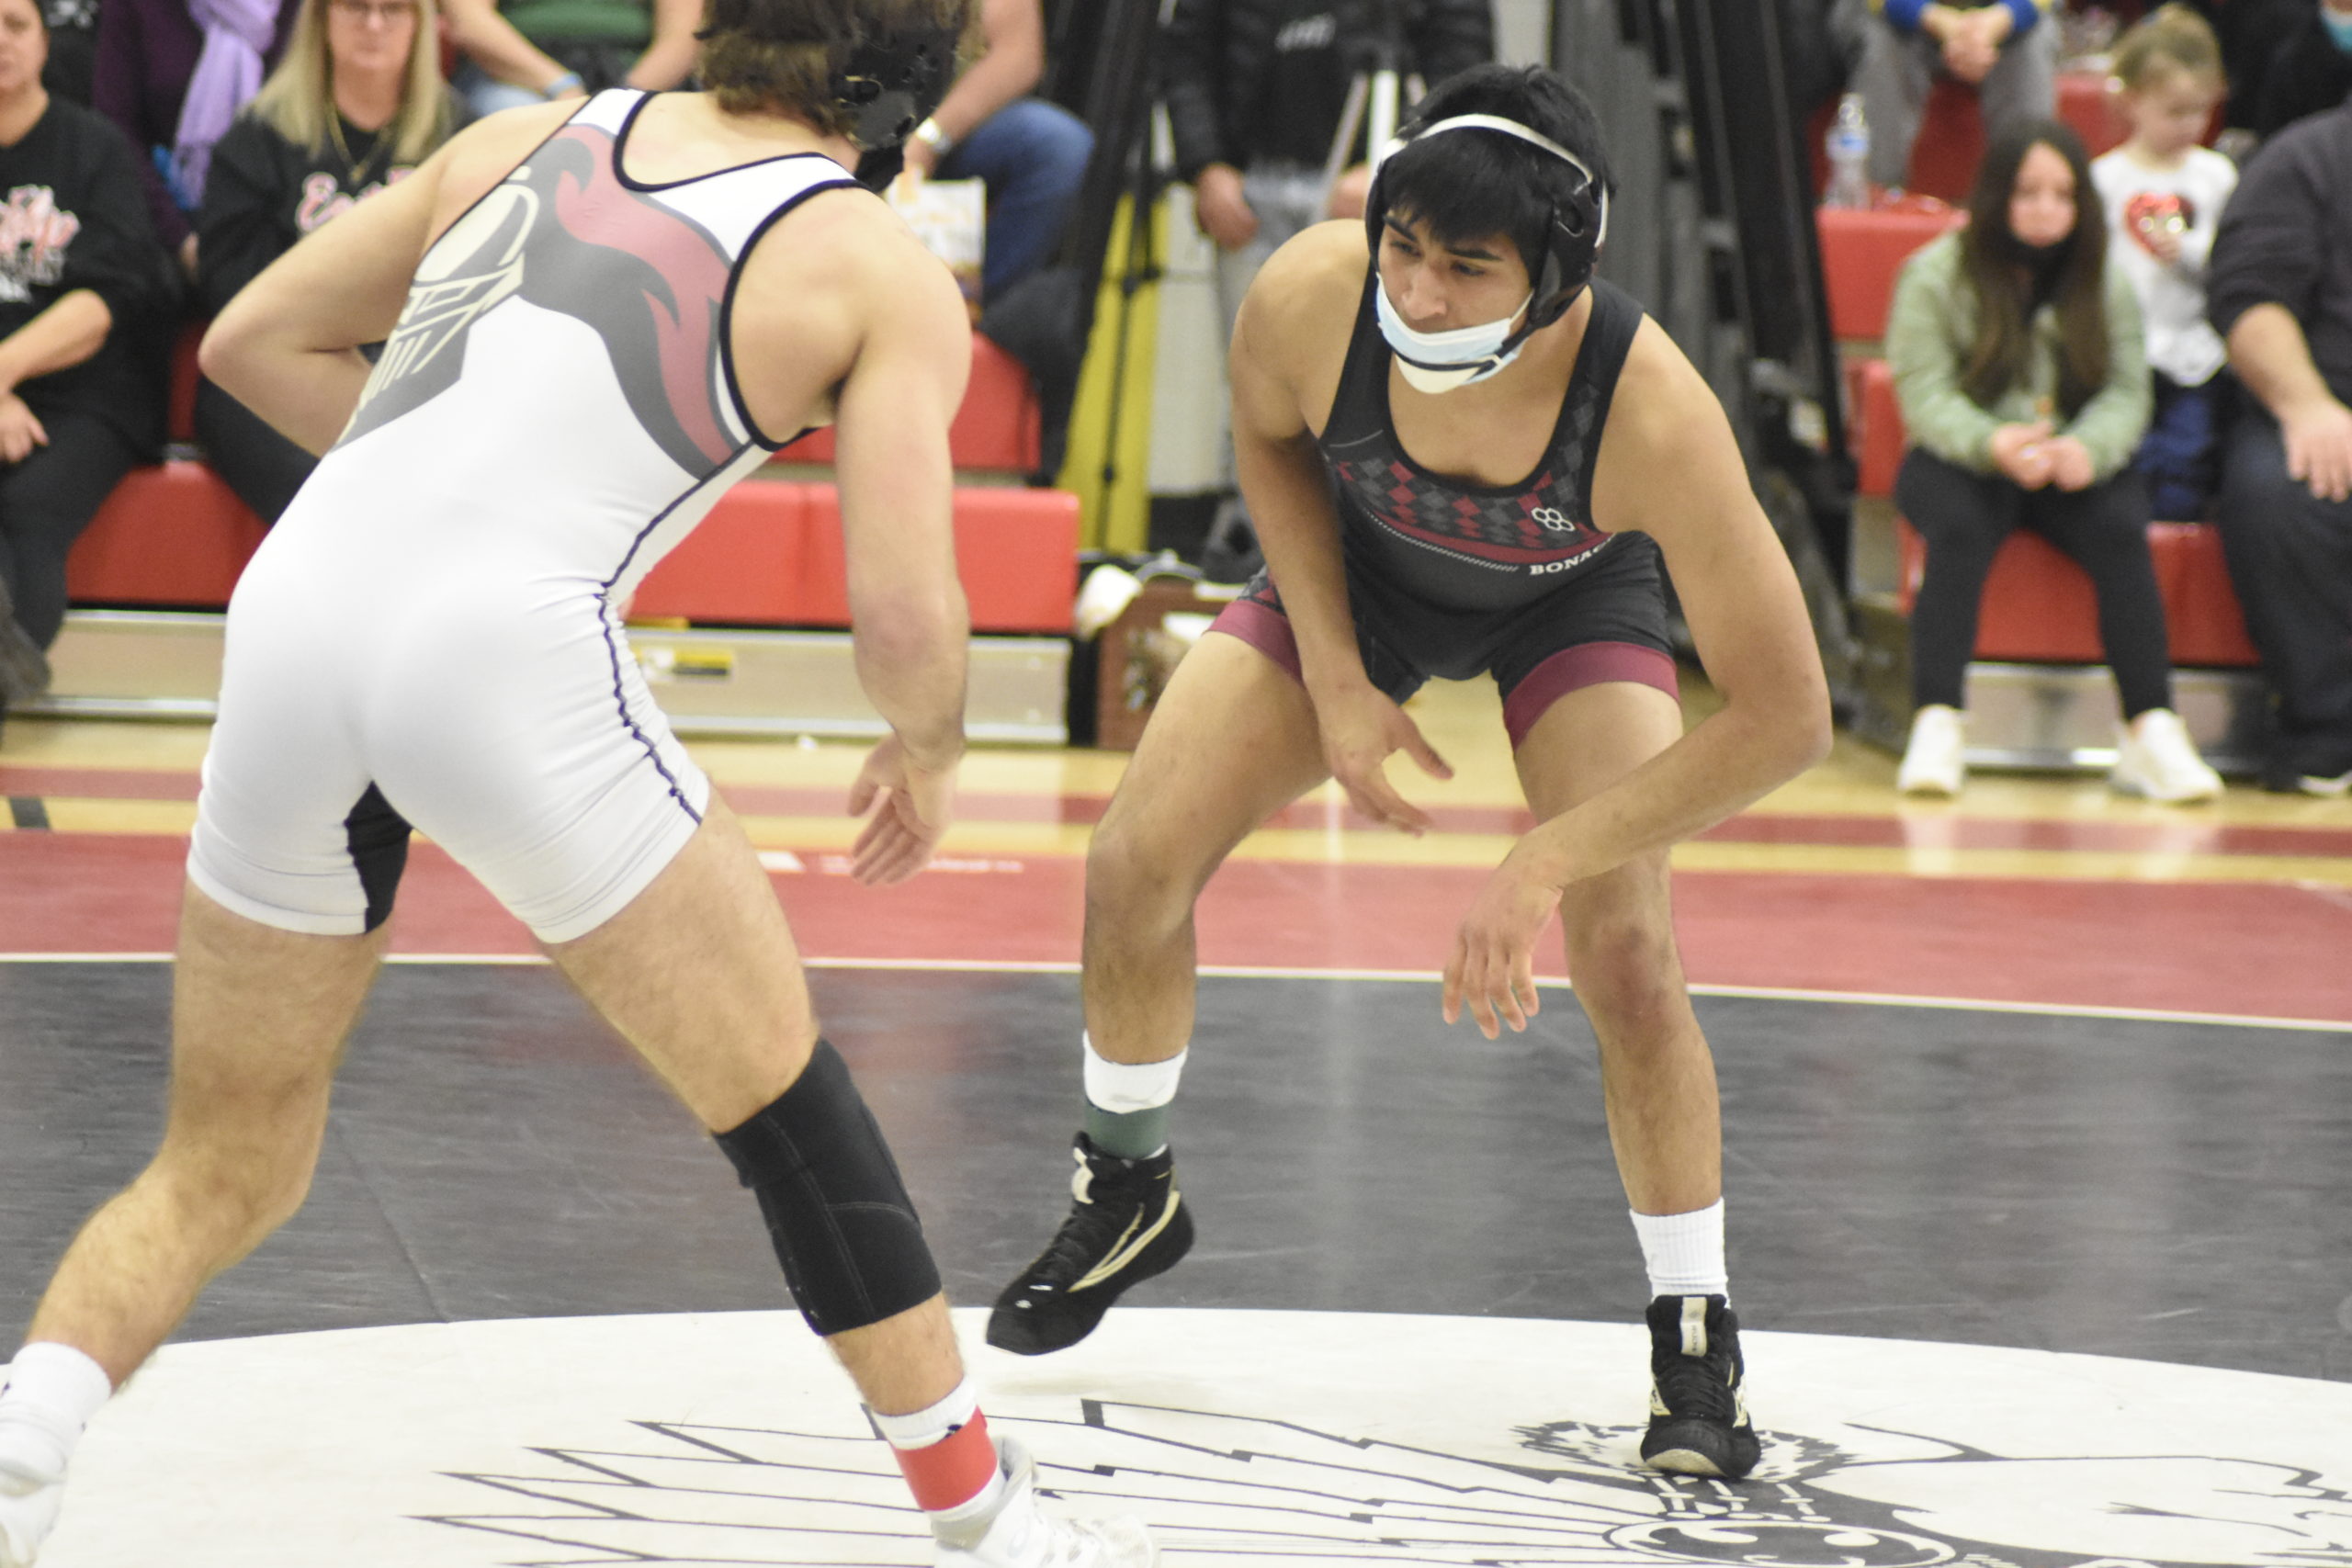 Bonac senior Caleb Peralta faced off against Vin Ziccardi of Kings Park for the 126-pound League V title on Saturday.